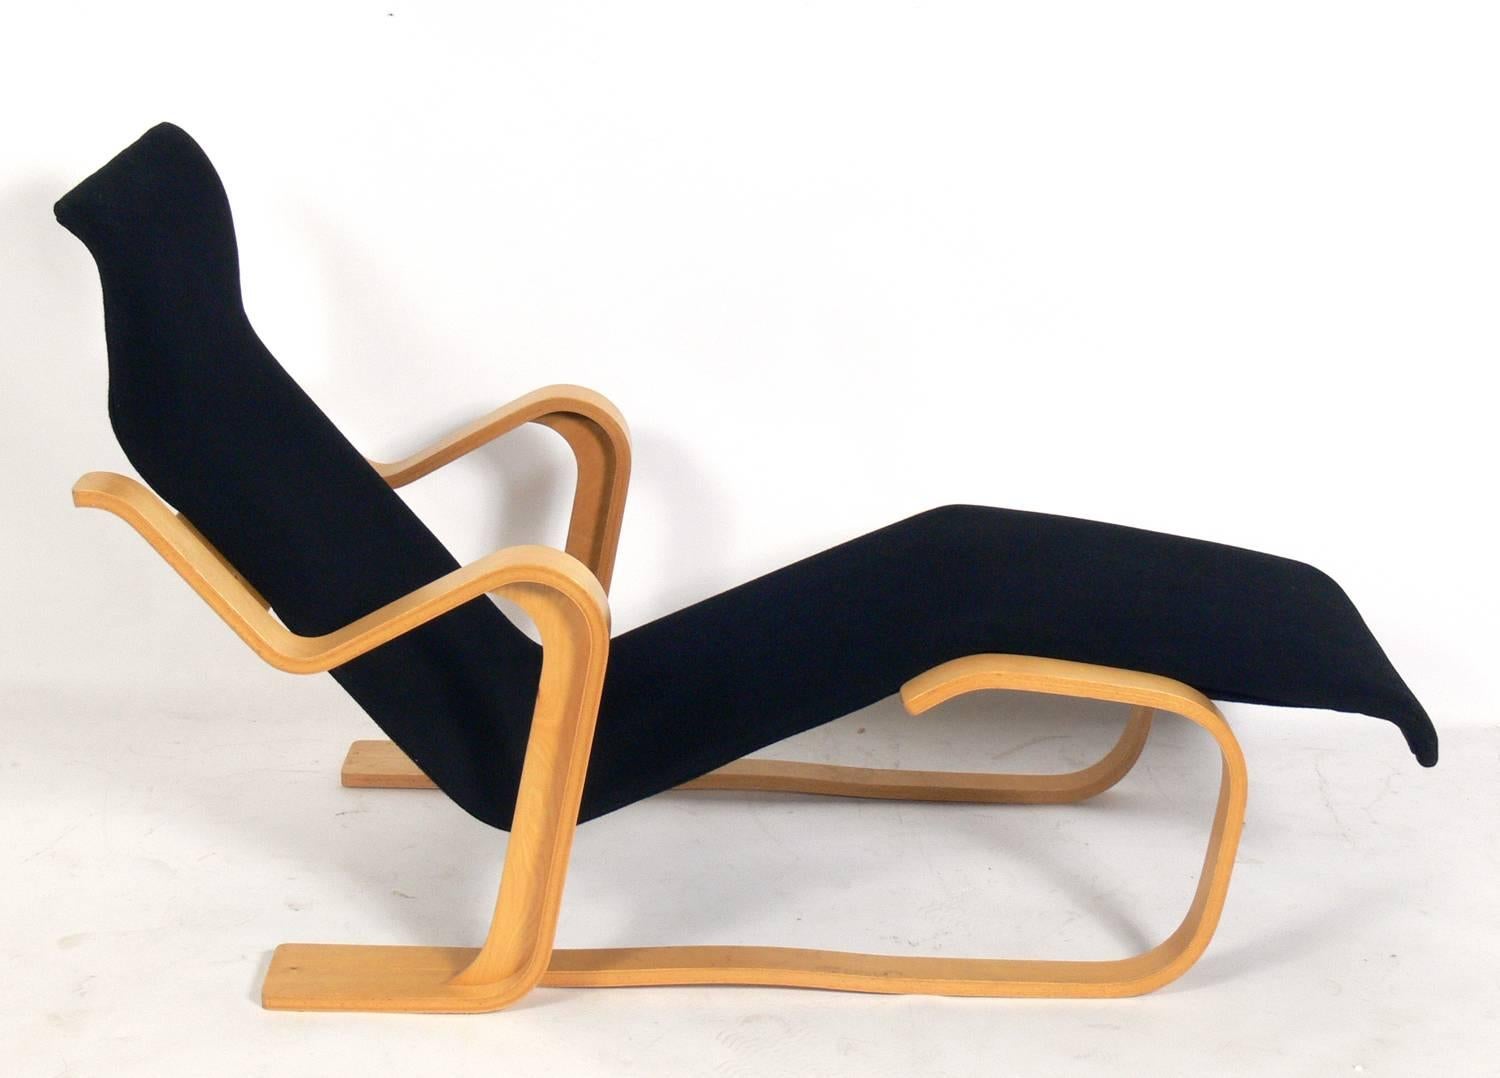 Sculptural bentwood chaise longue chair, designed by Marcel Breuer for Gavina, circa 1980s. Originally produced by Isokon in the 1930s, this example is from the later production by the Italian firm of Gavina, who began producing the chaise in 1962.